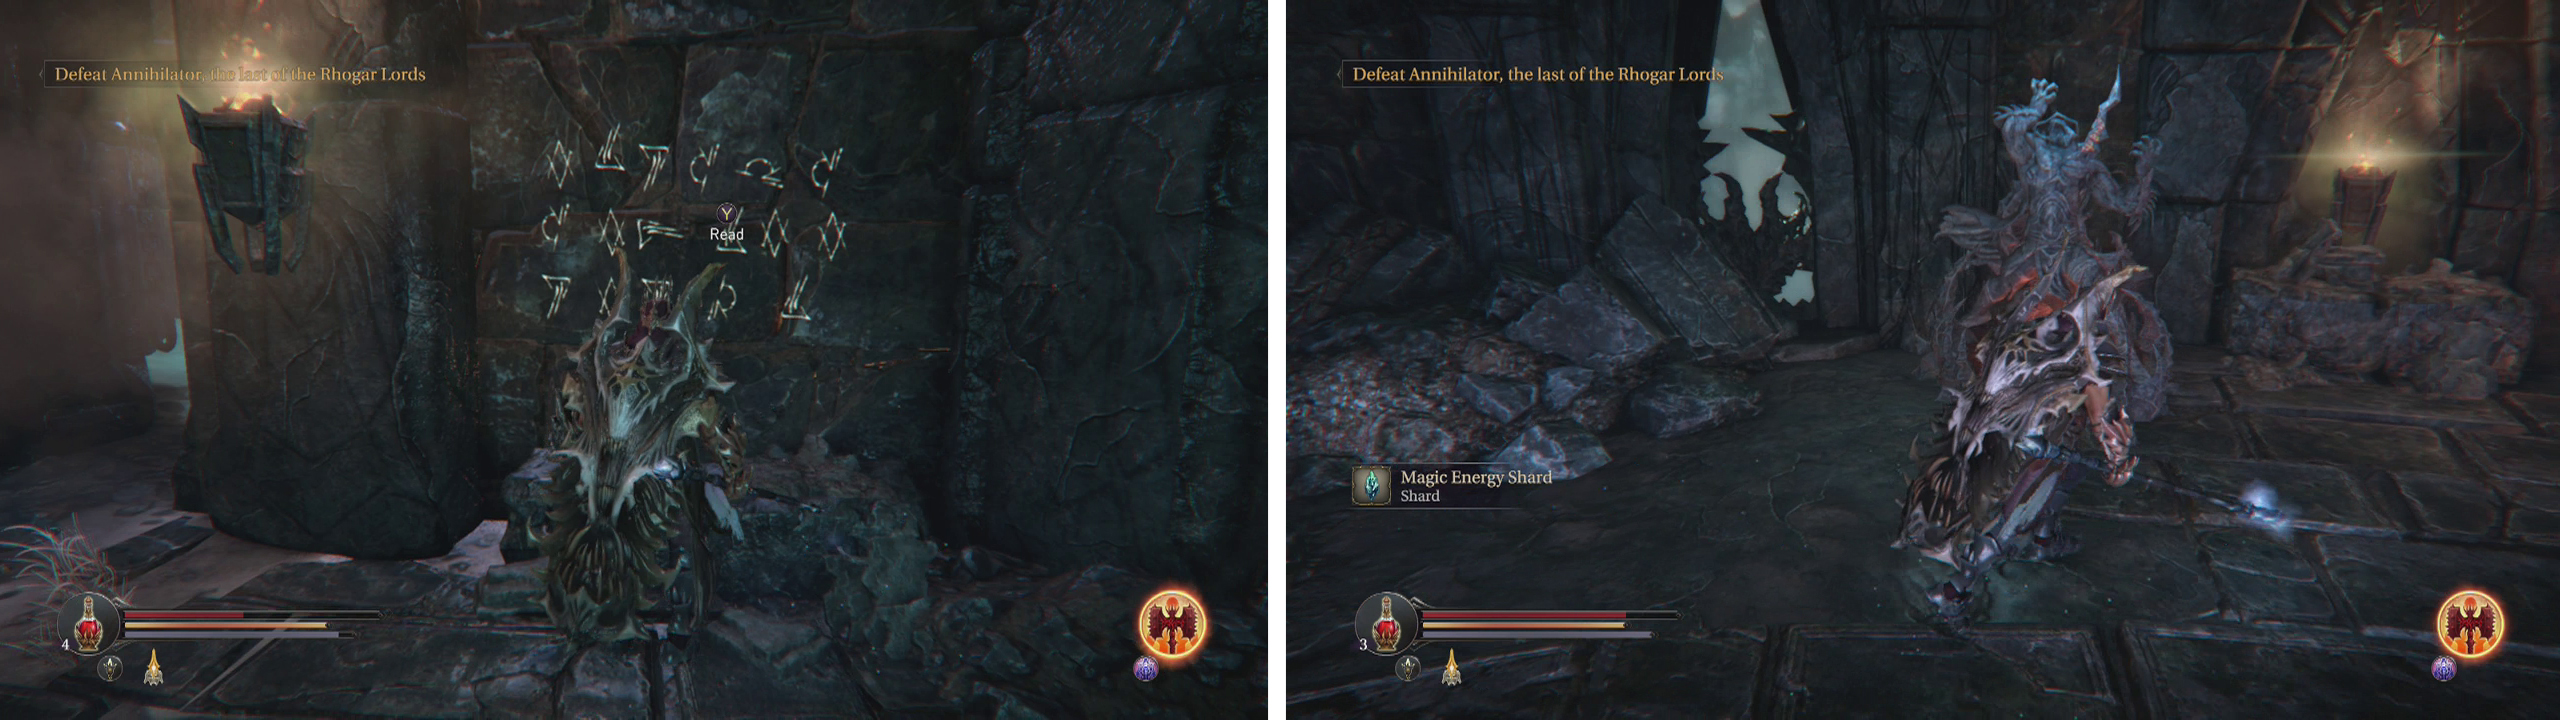 If you take a detour to the Altar Ruins, you can find a Runic Note (left) and a statue to destroy with the Tor Hammer (right).